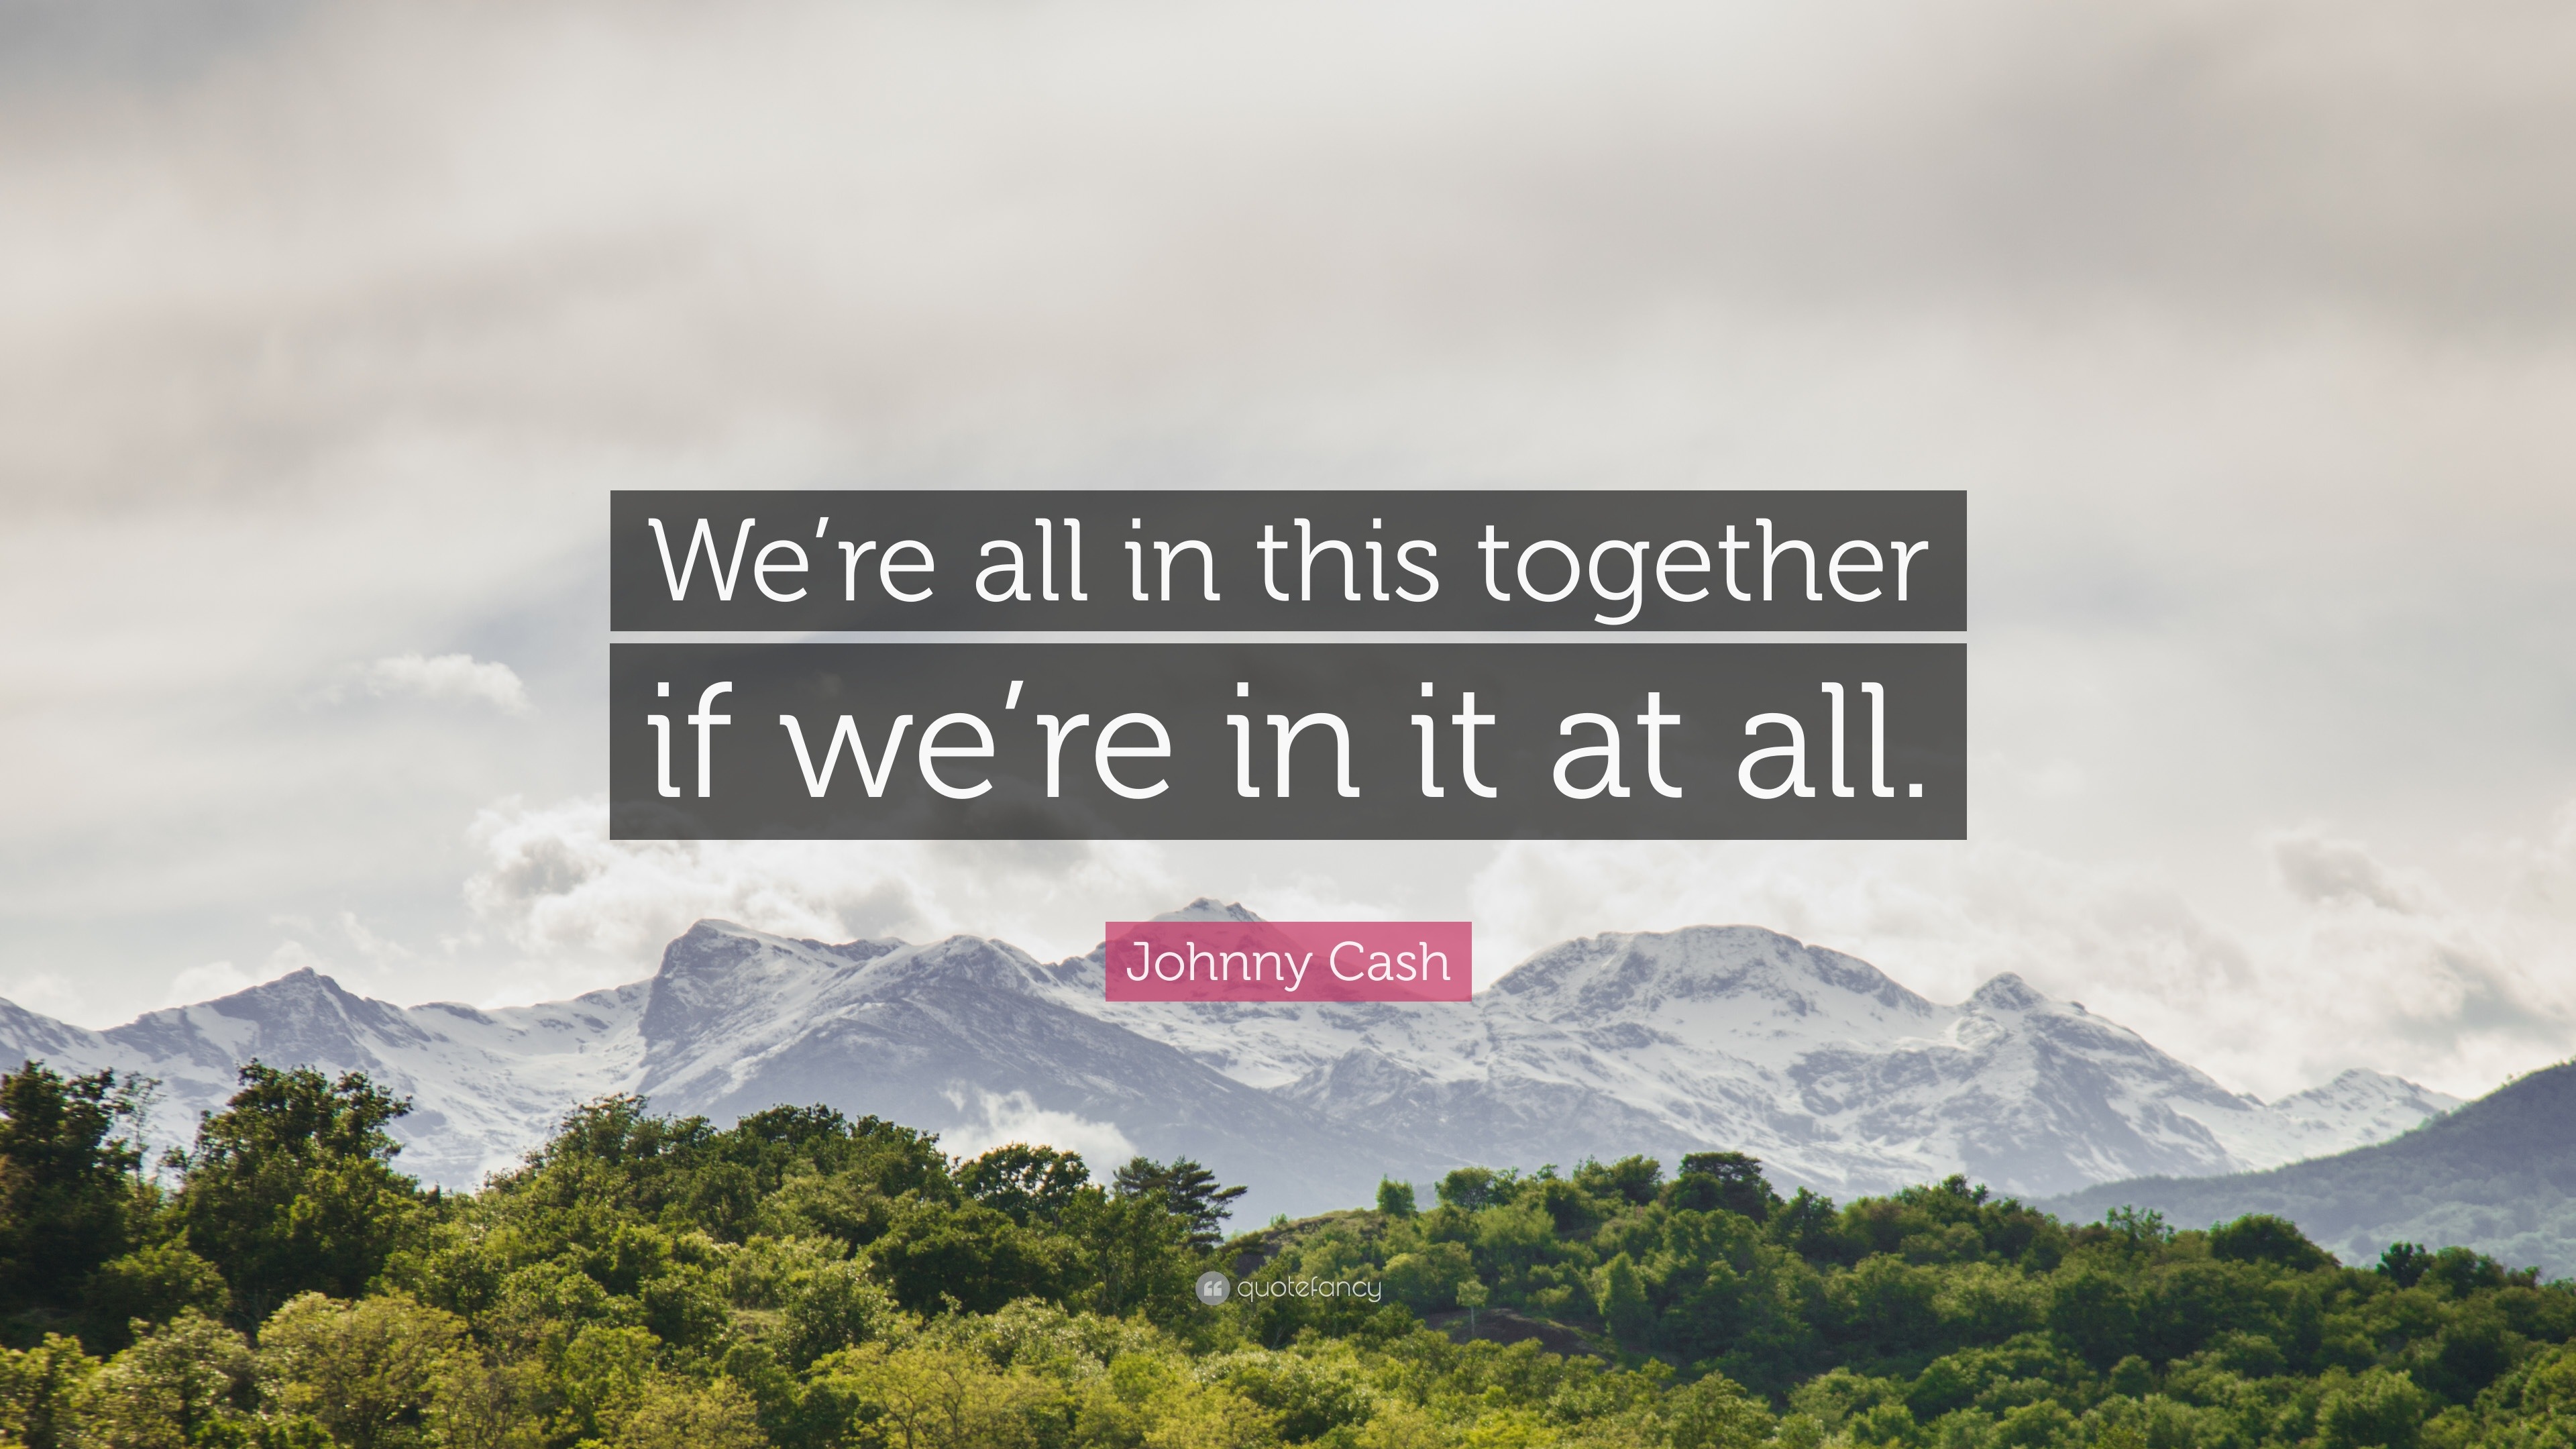 Johnny Cash Quote: “We're All In This Together If We're In It At All.”